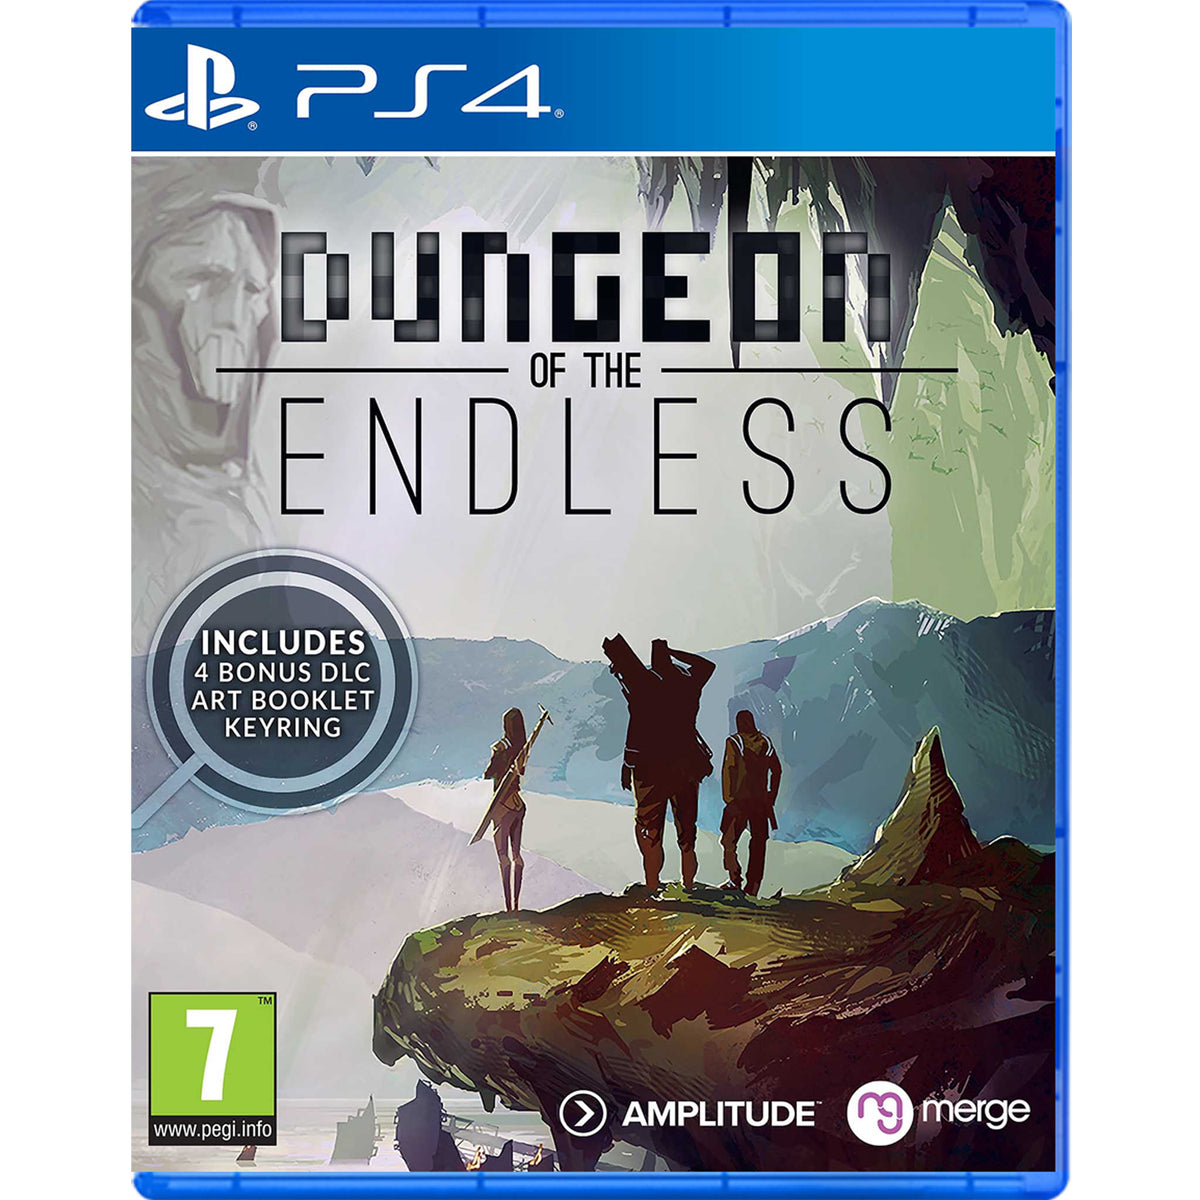 endless dungeon ps4